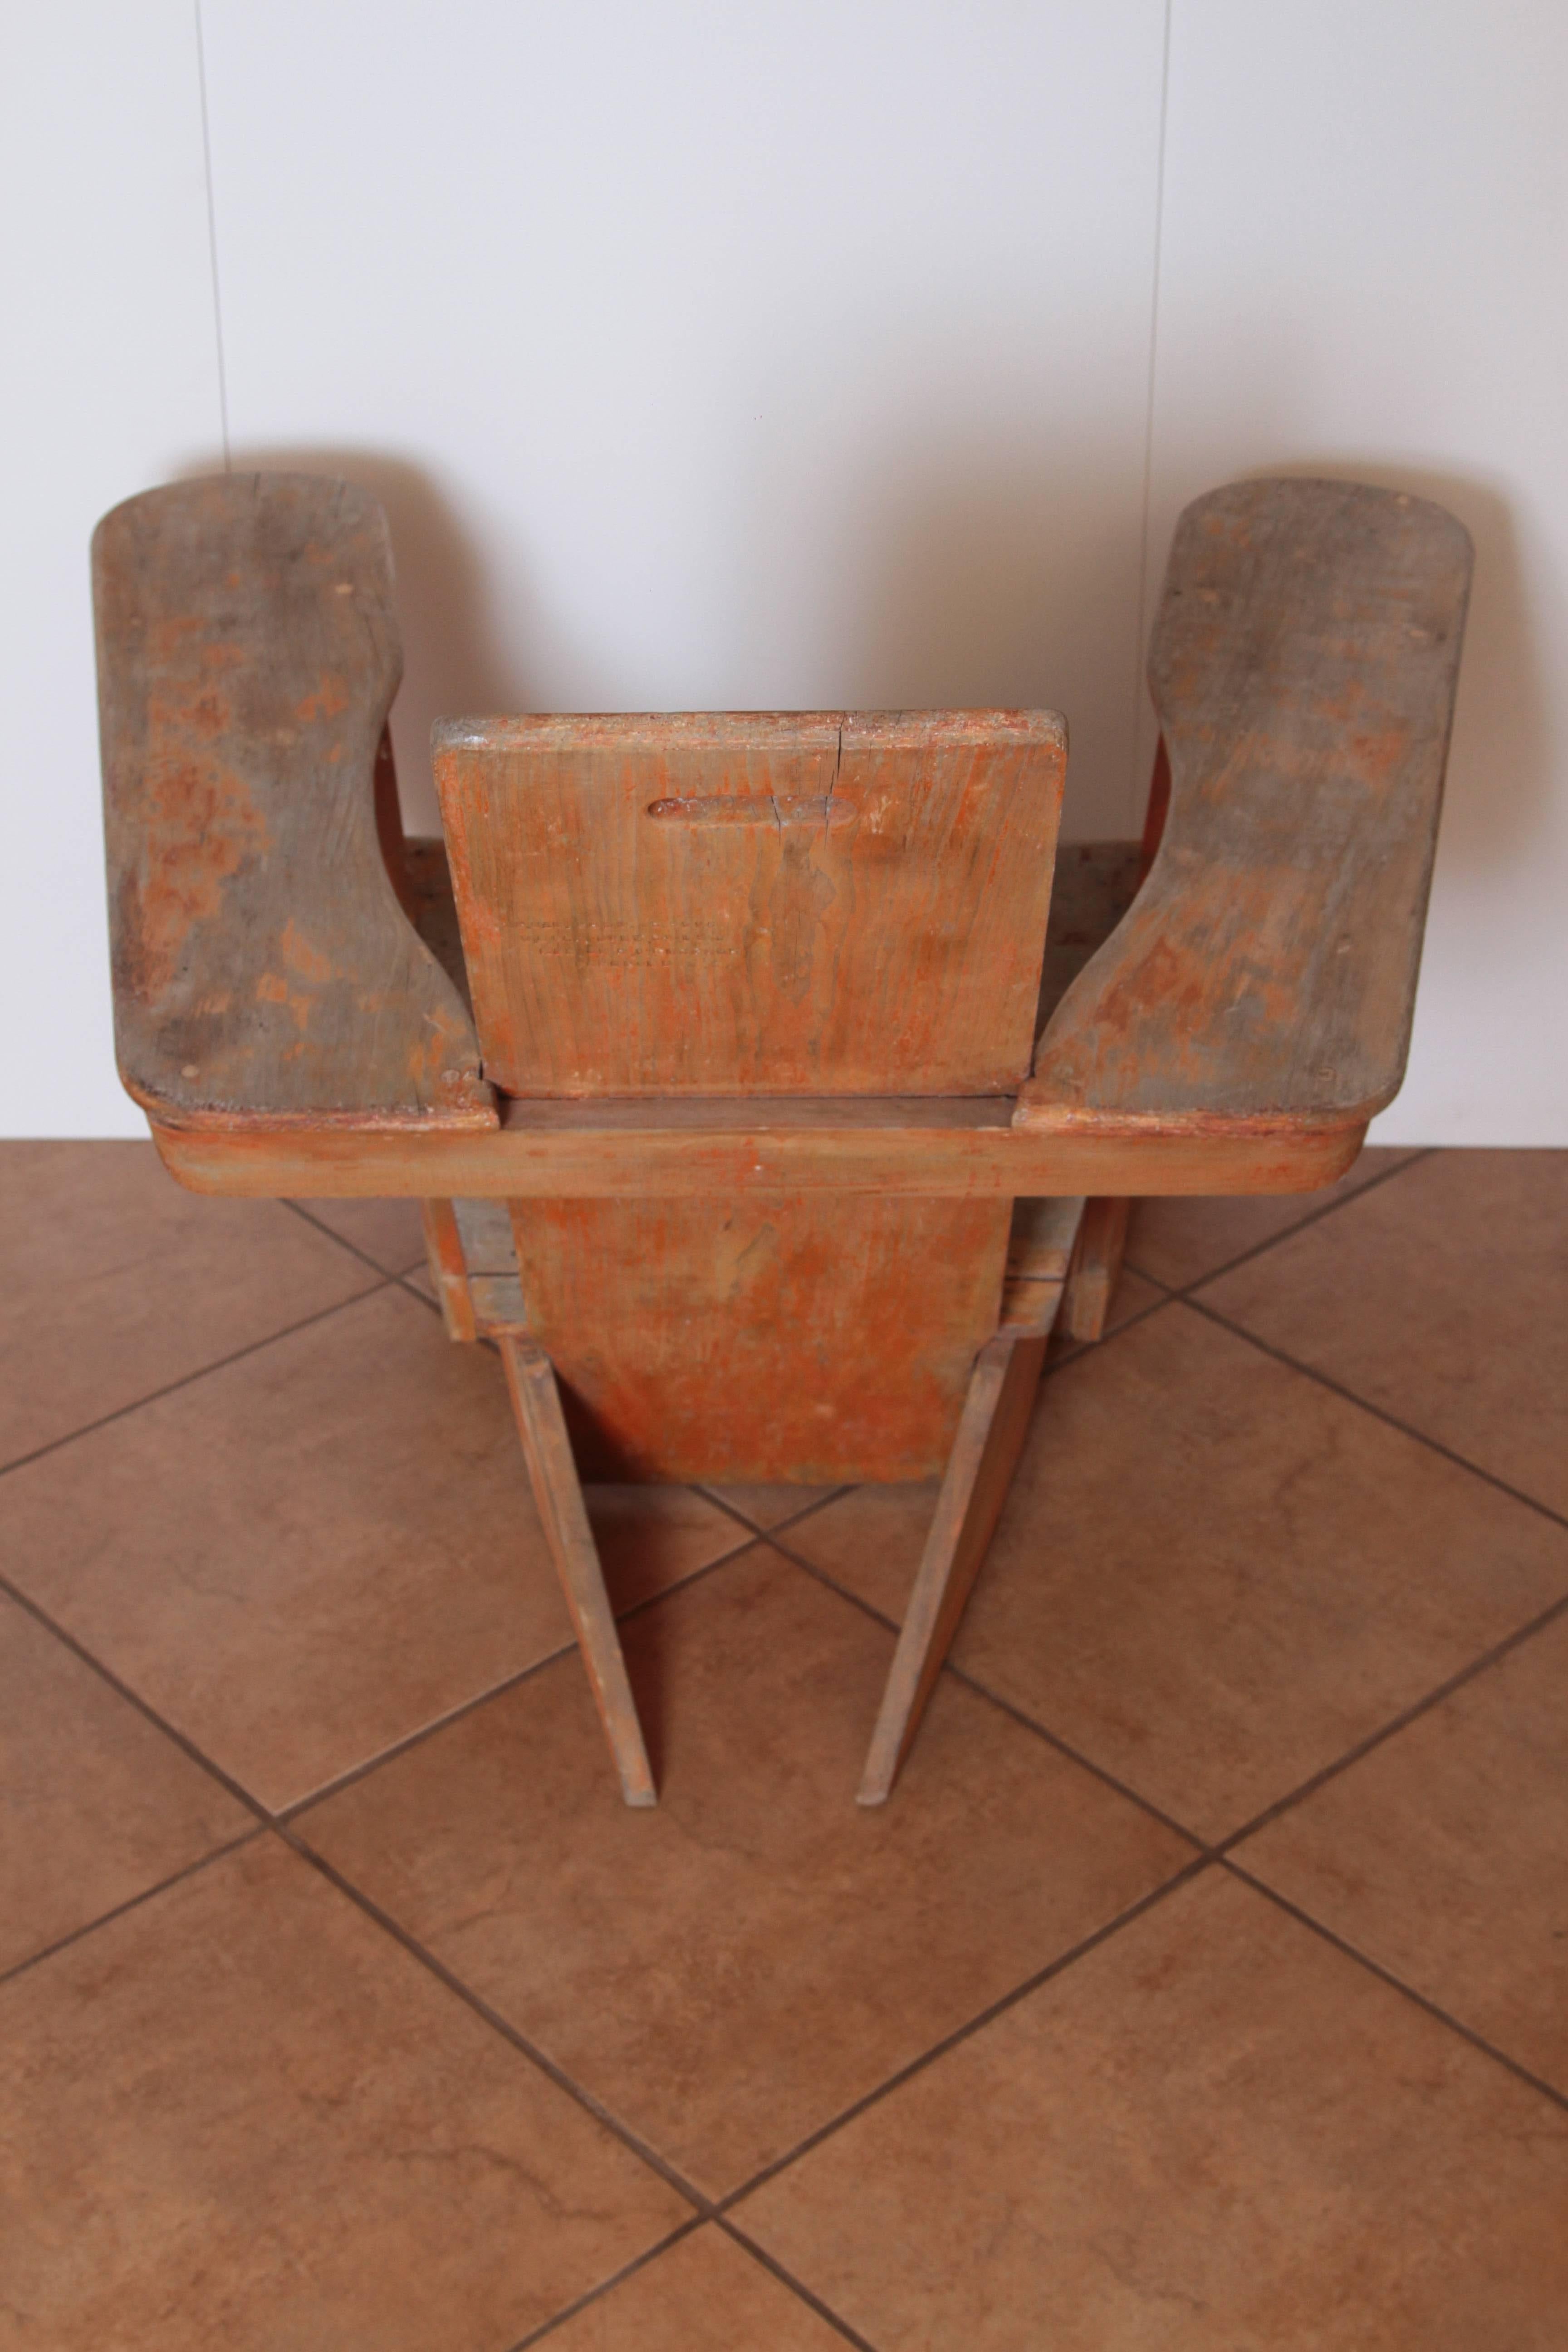 Constructivist Westport Adirondack Lounge Chair,  Early Modernist ON SALE Deco In Good Condition For Sale In Dallas, TX